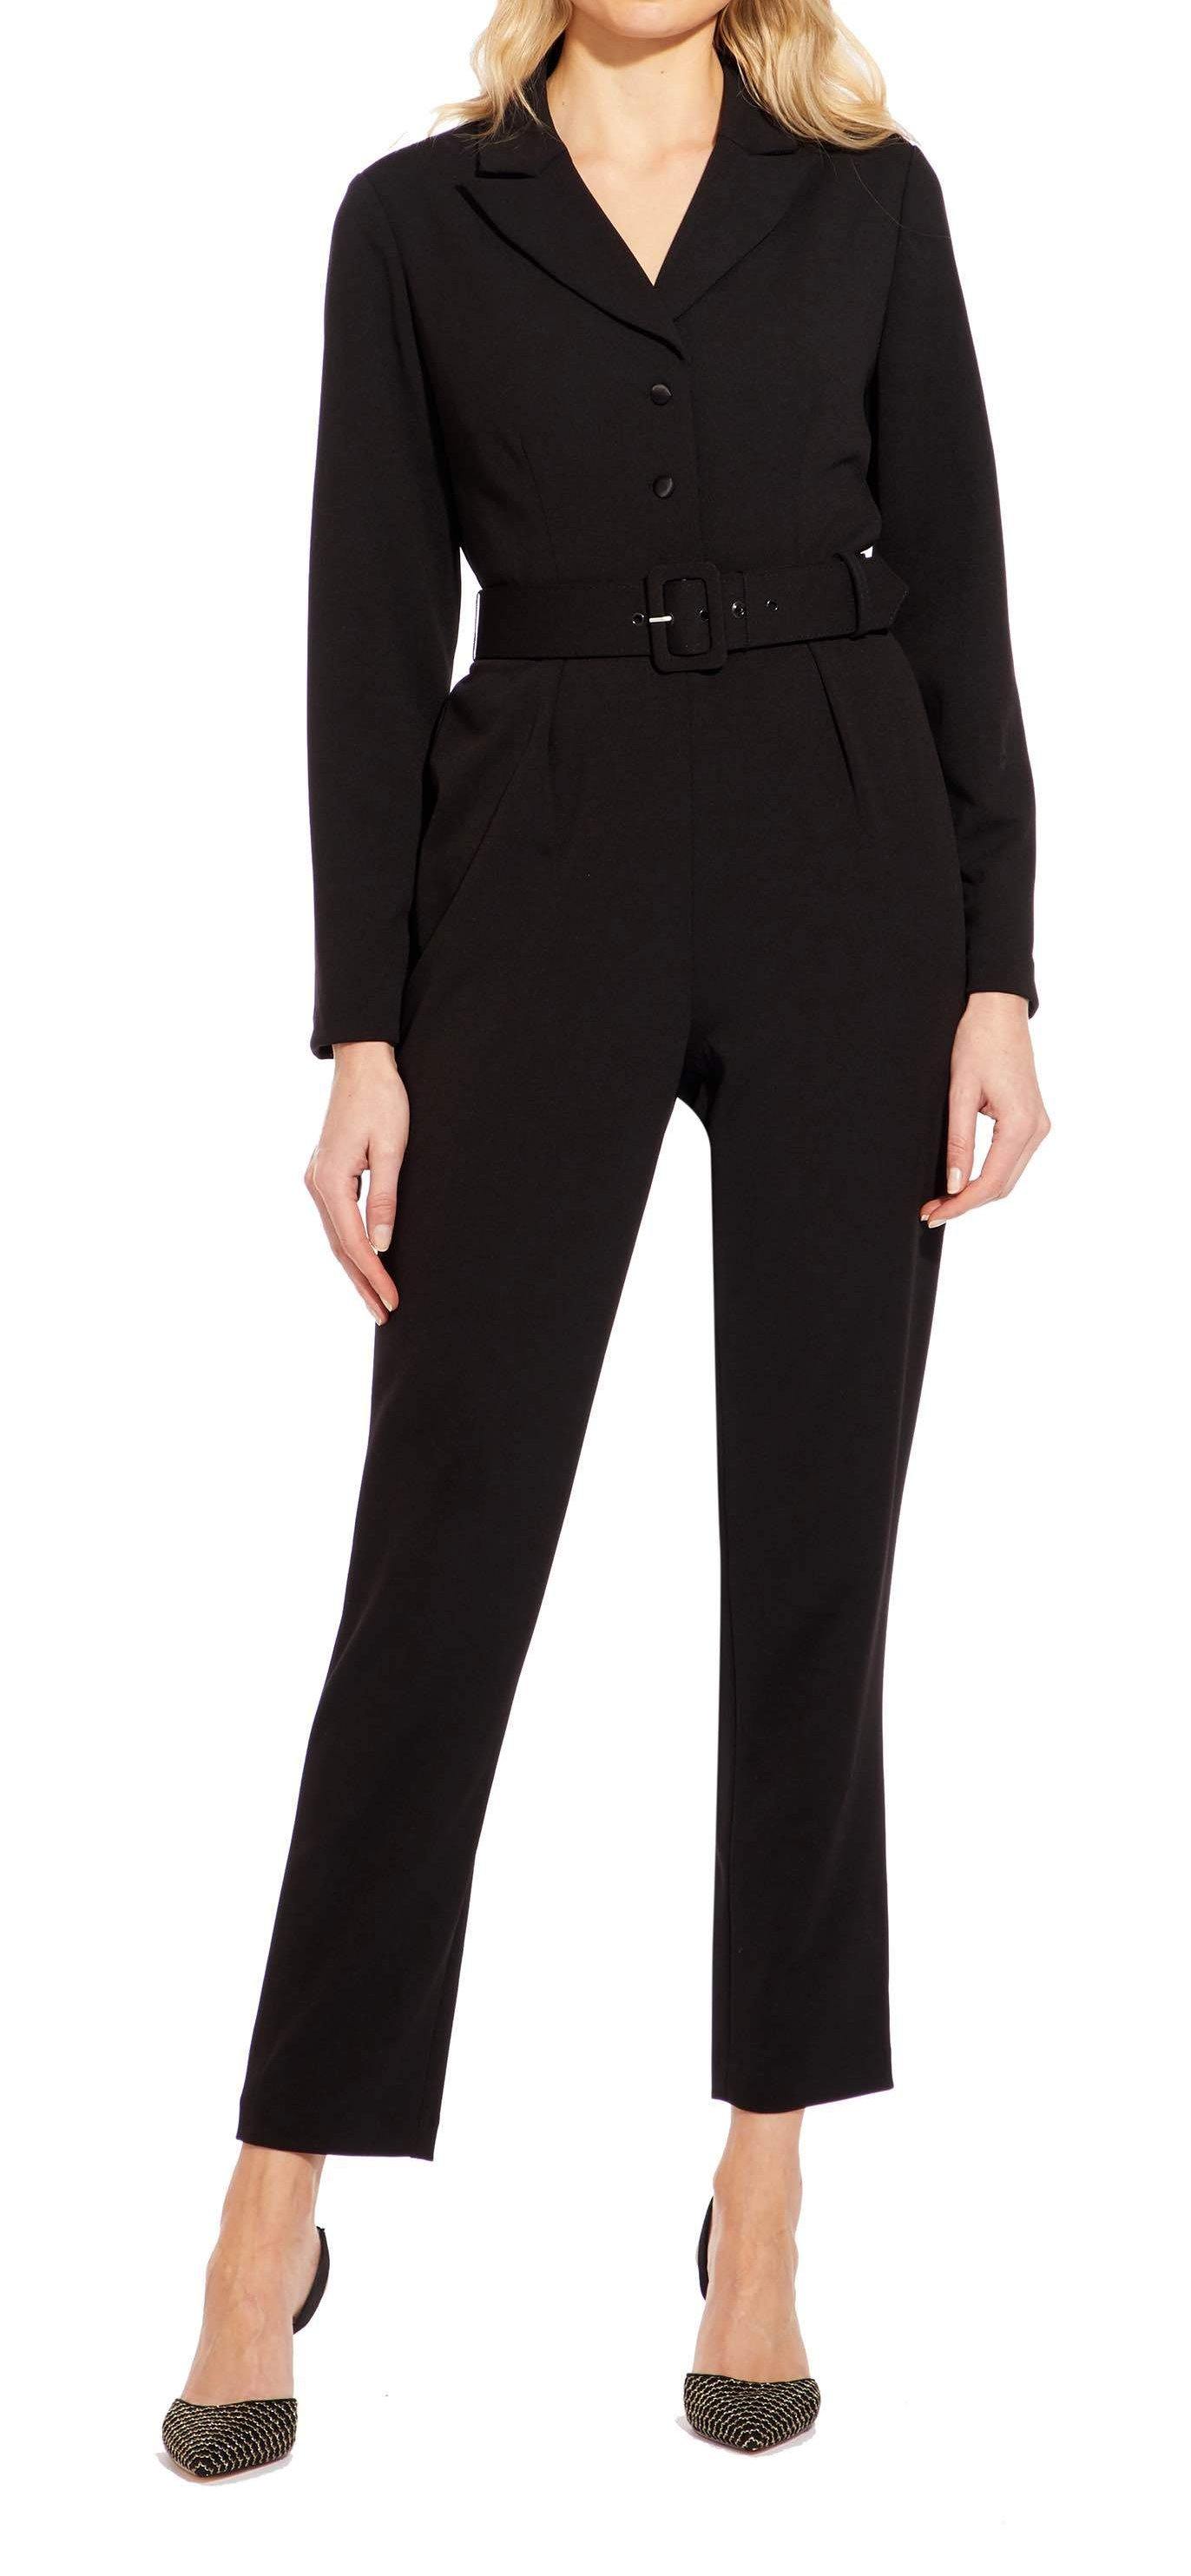 Adrianna Papell Long Sleeve Belted Solid Stretch Crepe Jumpsuit - The Dress Outlet Adrianna Papell